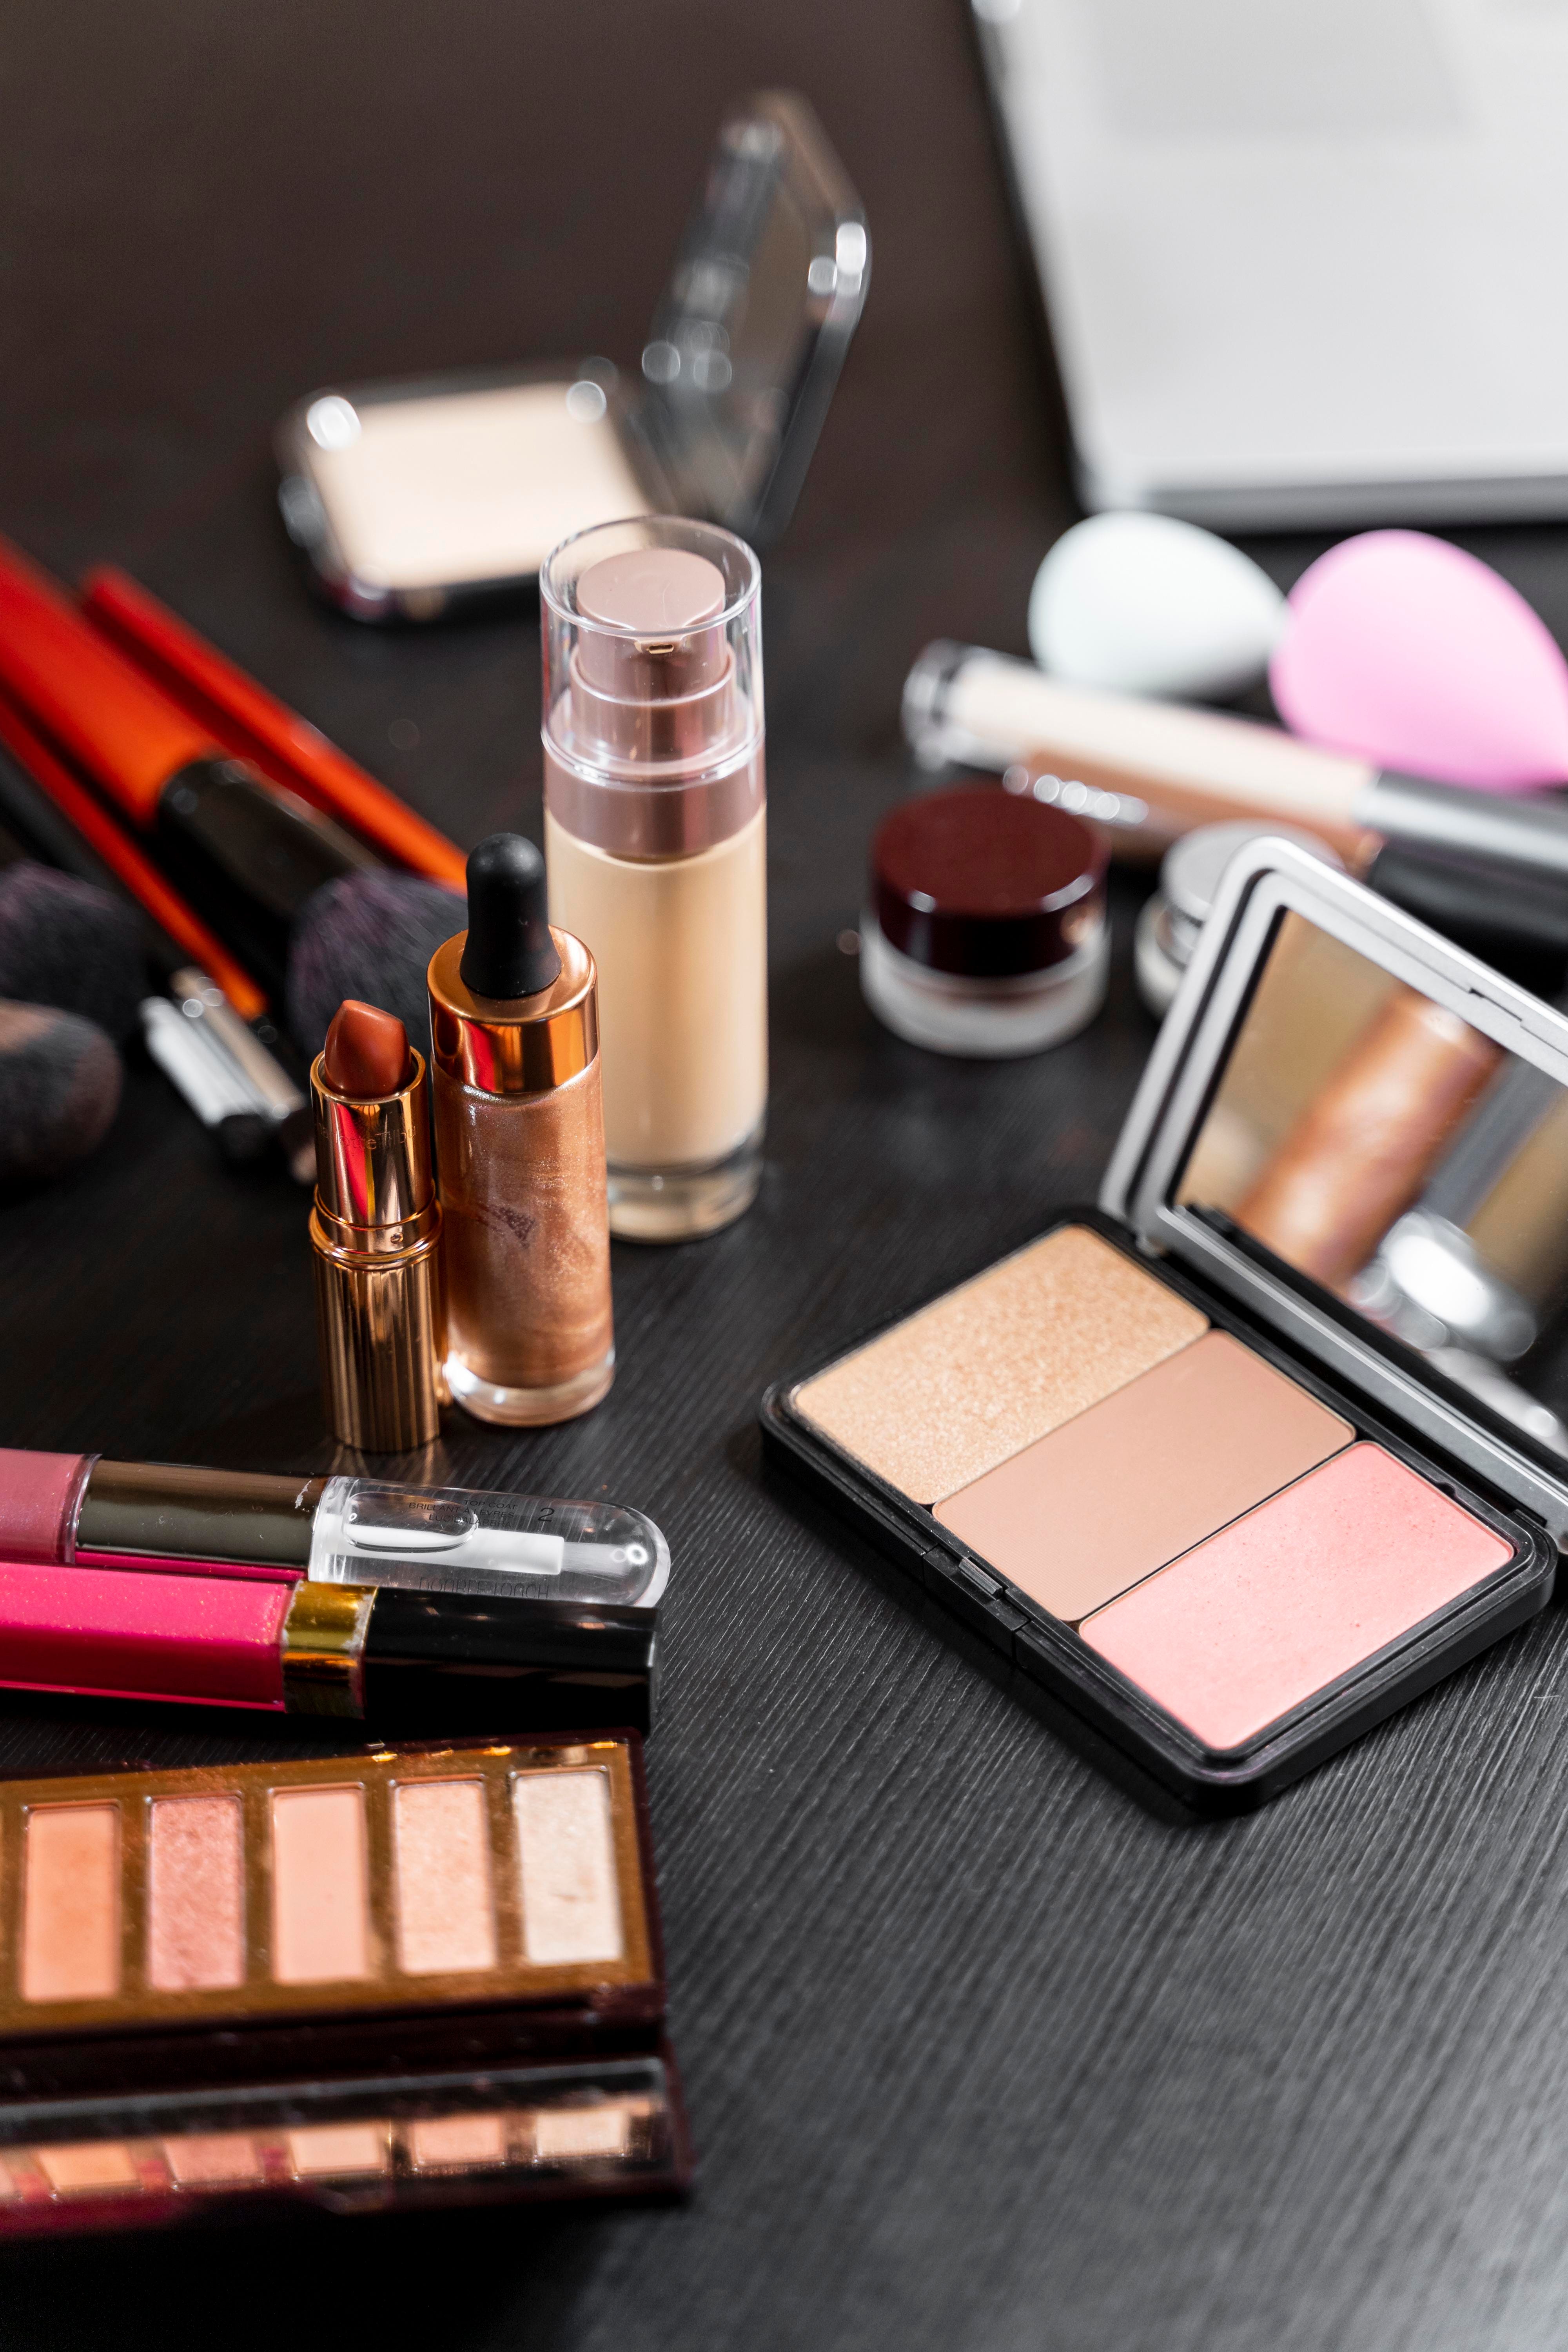 Buy Nykaa Makeup Online at Best Prices In India | Newmarketkart -  NewMarketkart - Medium